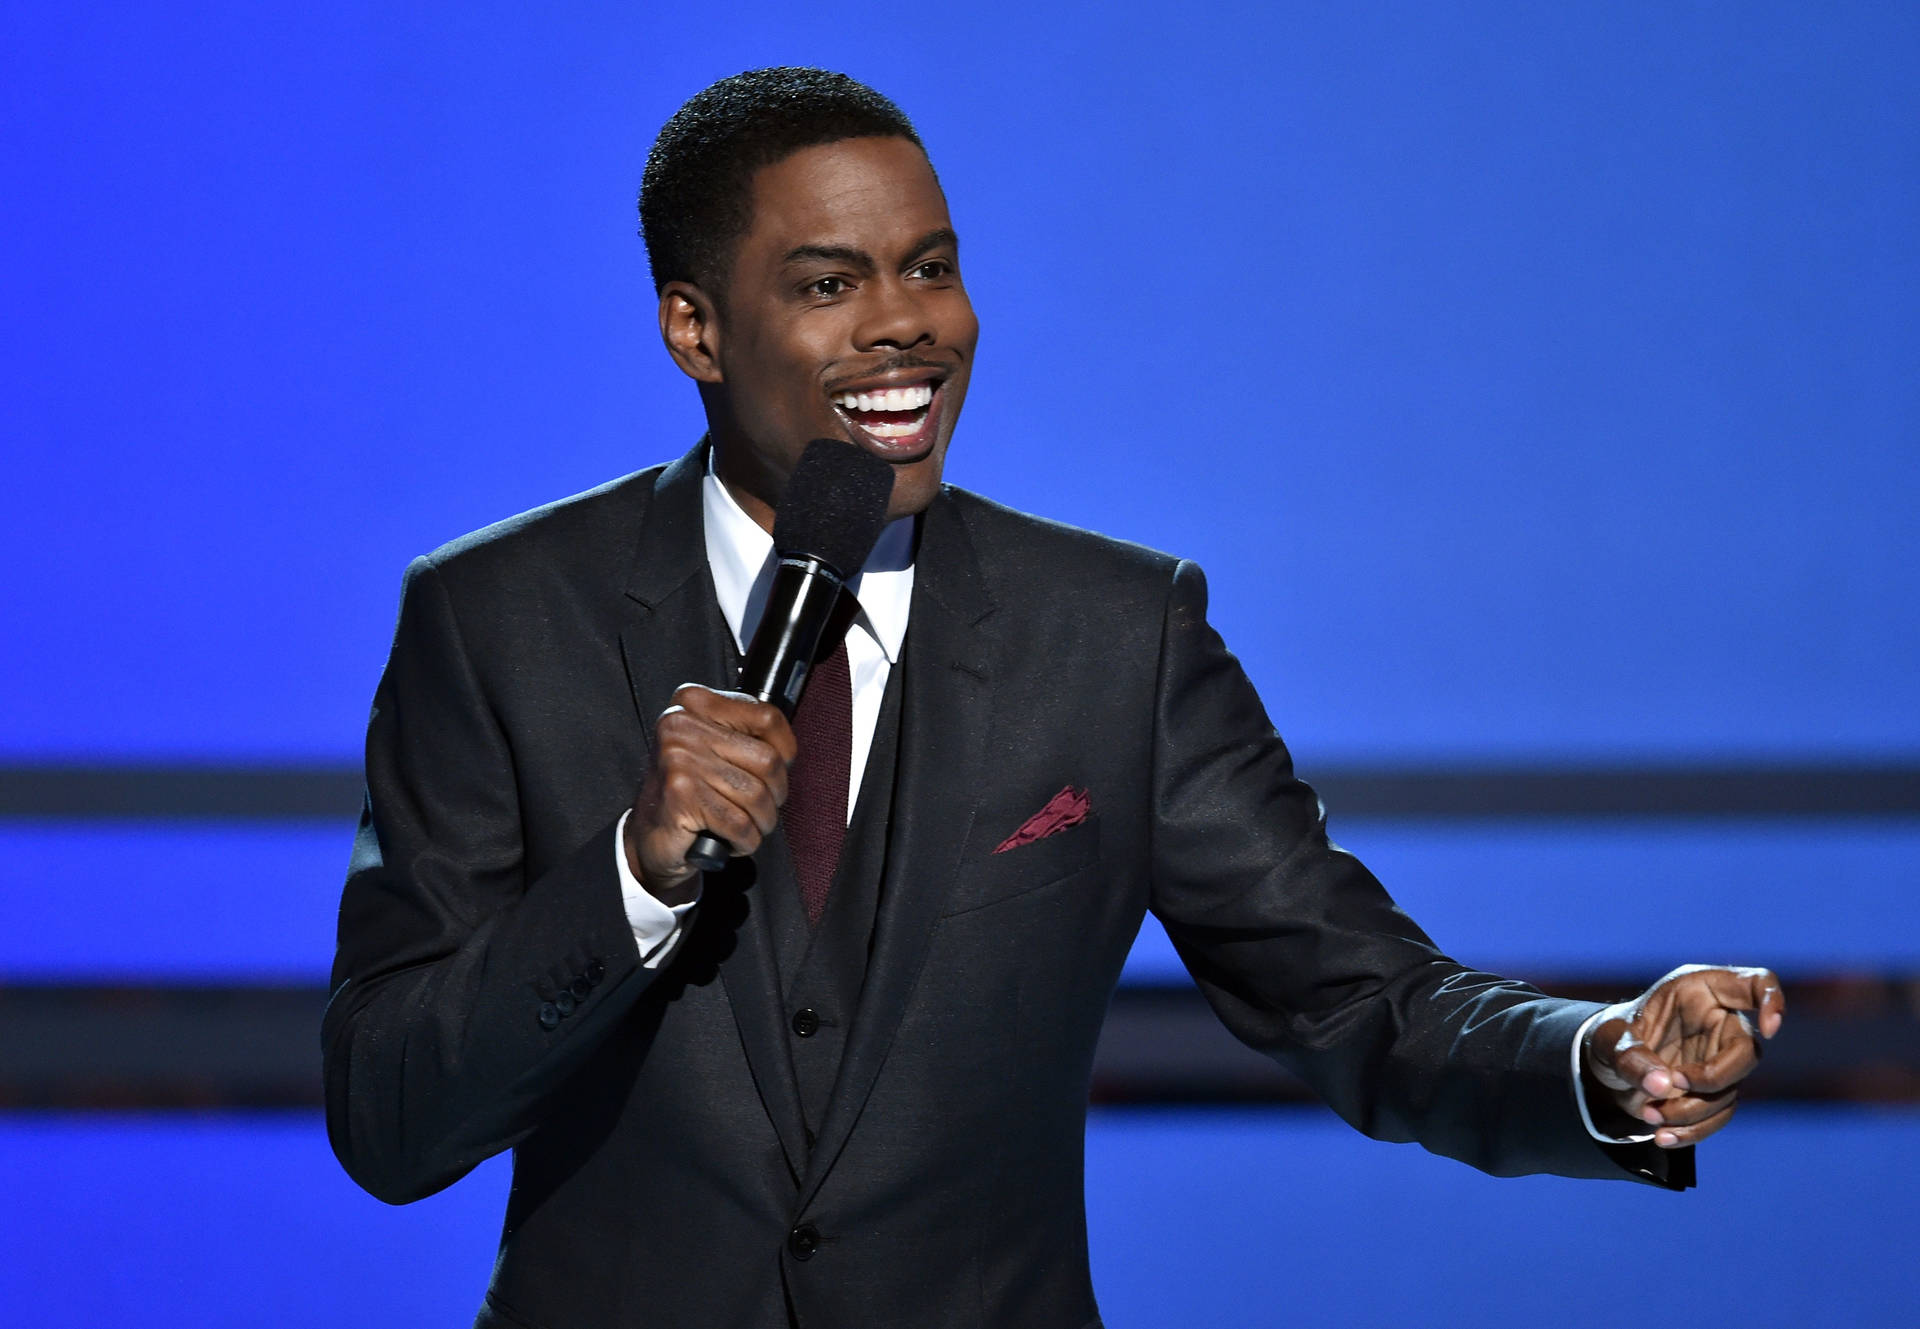 Chris Rock On Stage wallpaper